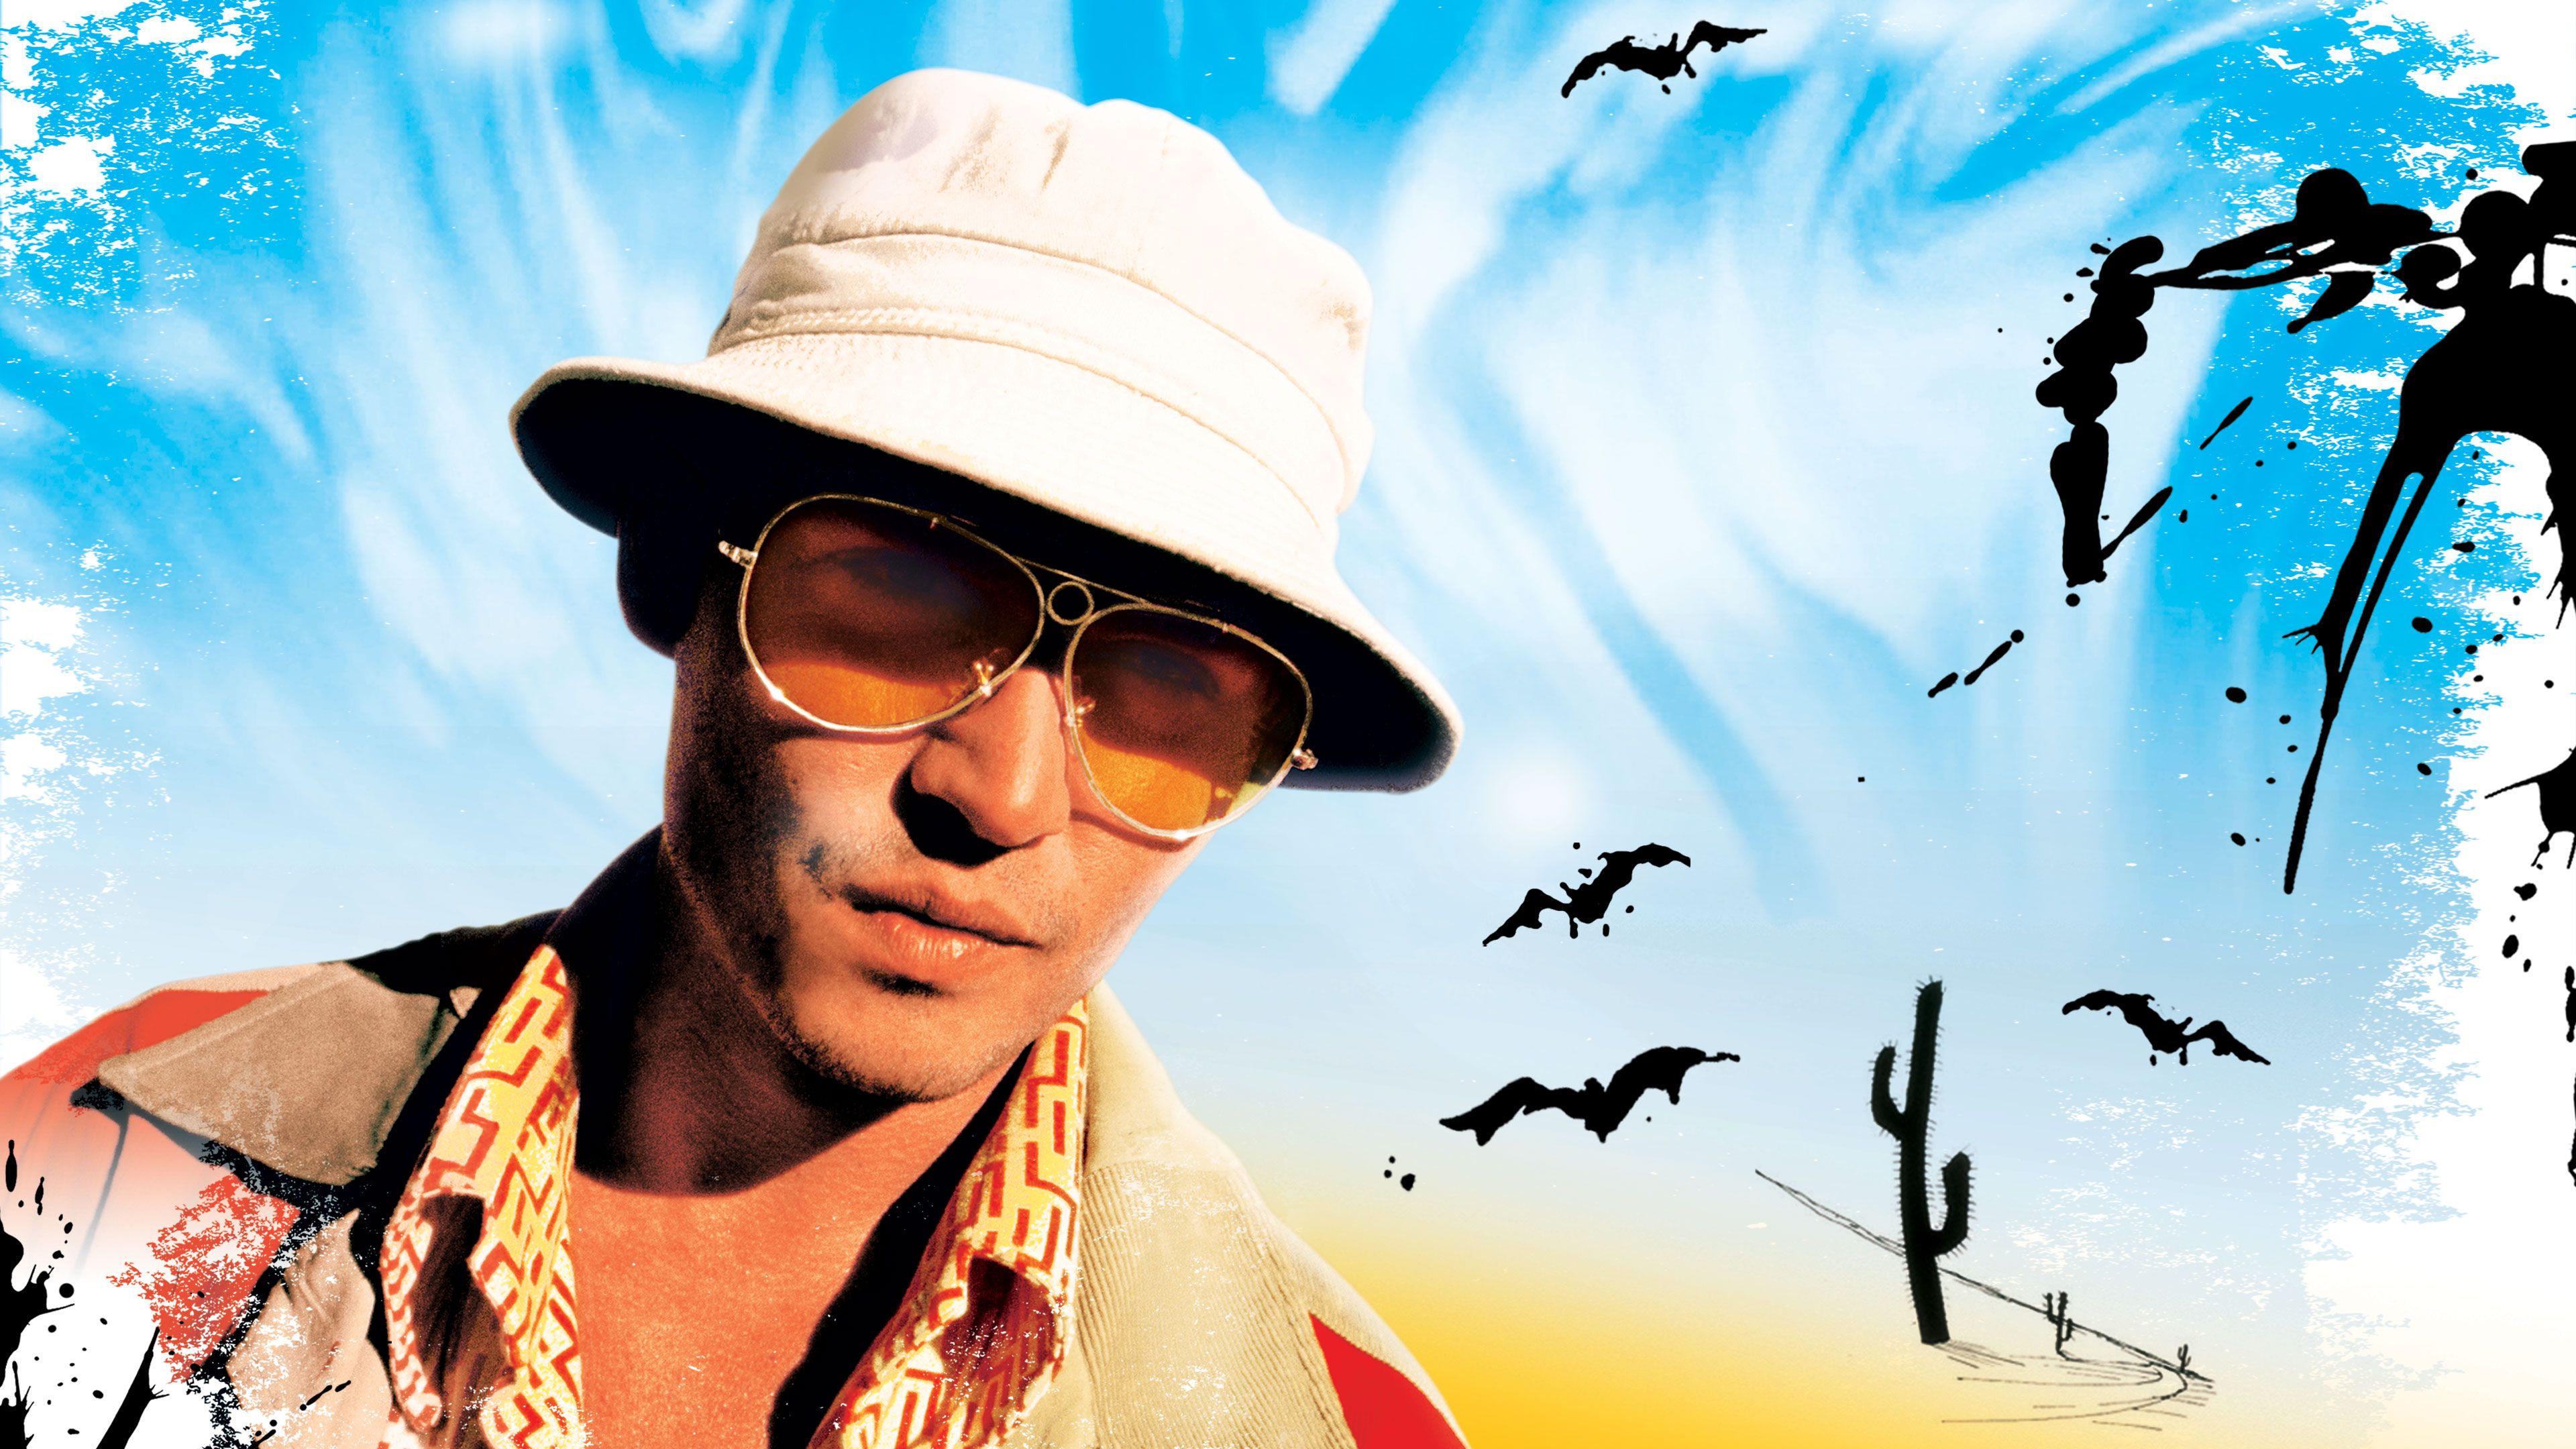 fear and loathing in las vegas hd subtitled